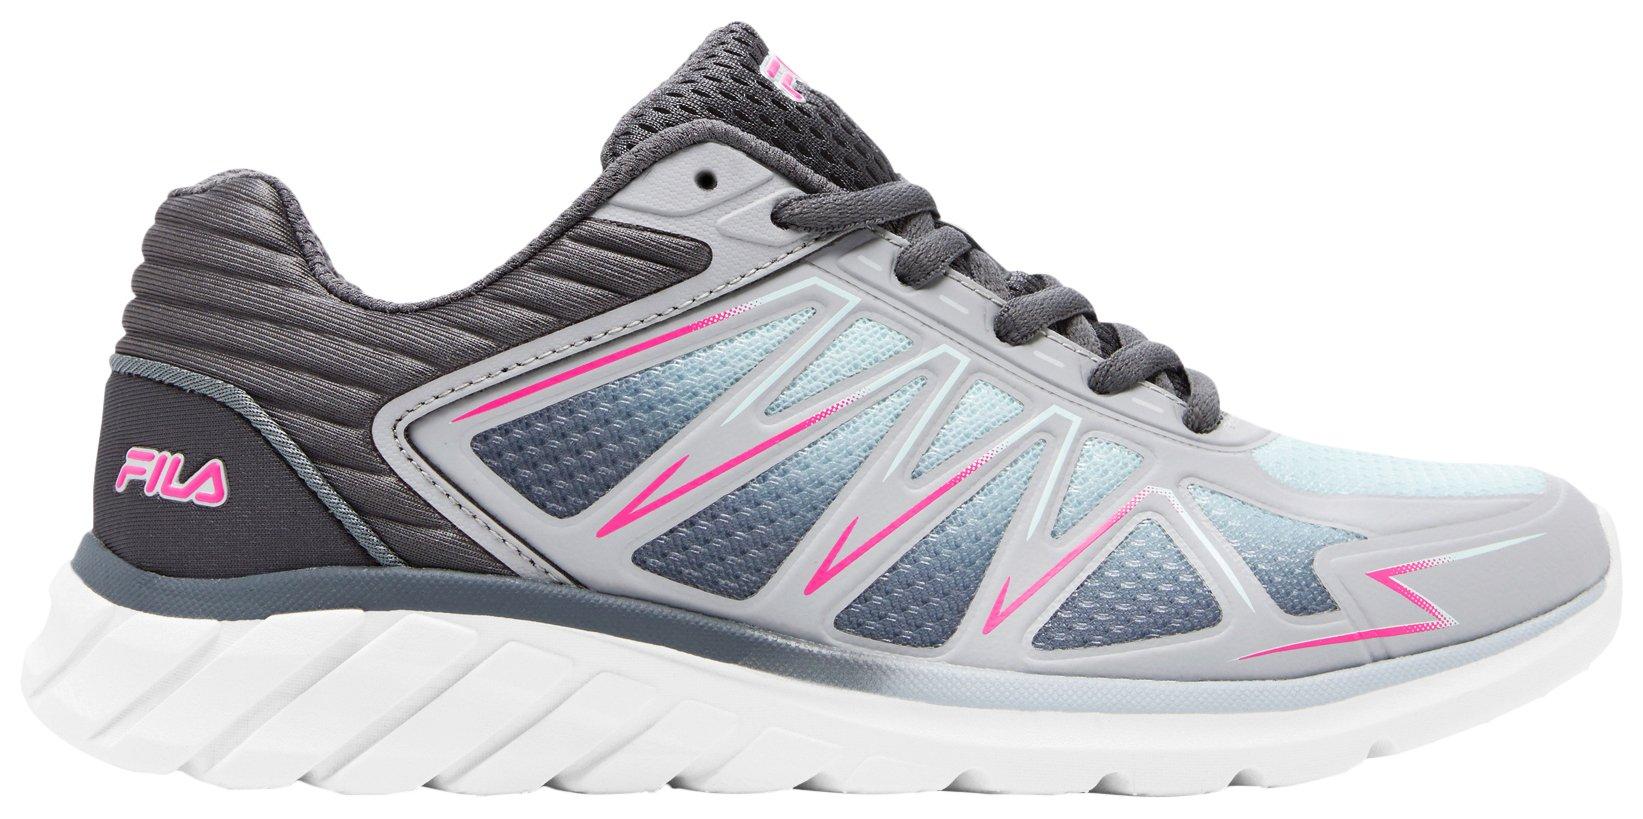 Womens Memory Superstride 6 Running Shoes